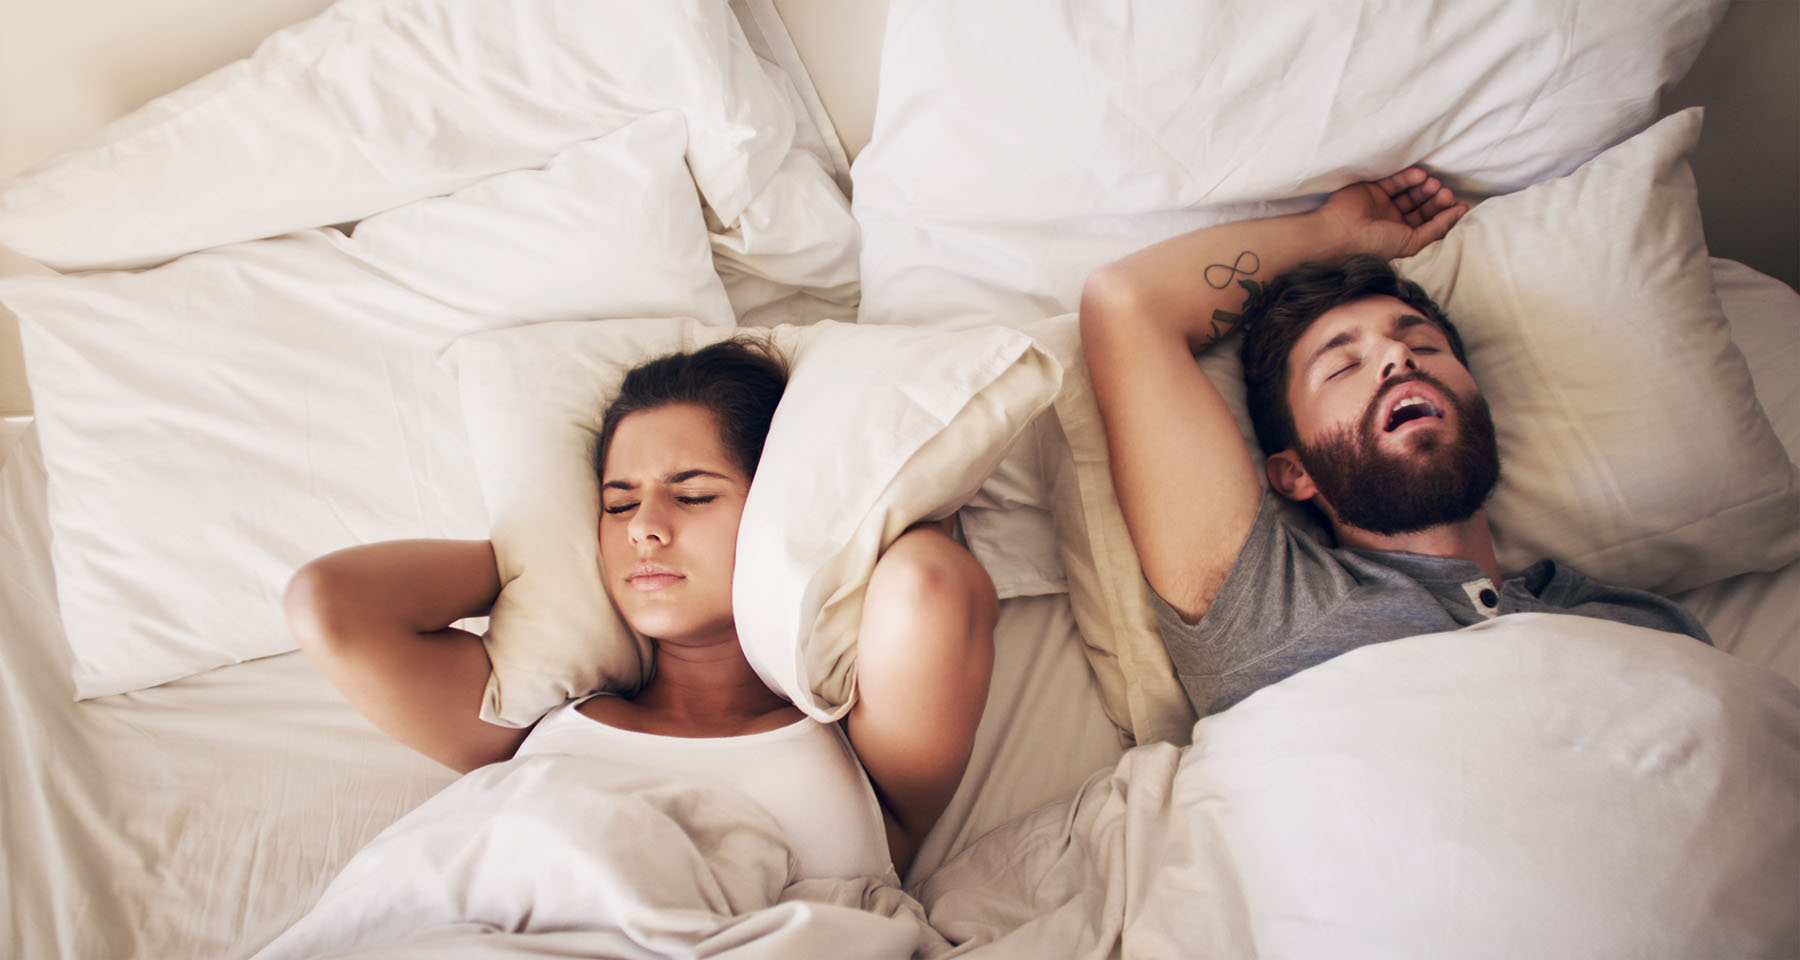 Couple in bed. Woman can't sleep because man is snoring from sleep apnea.